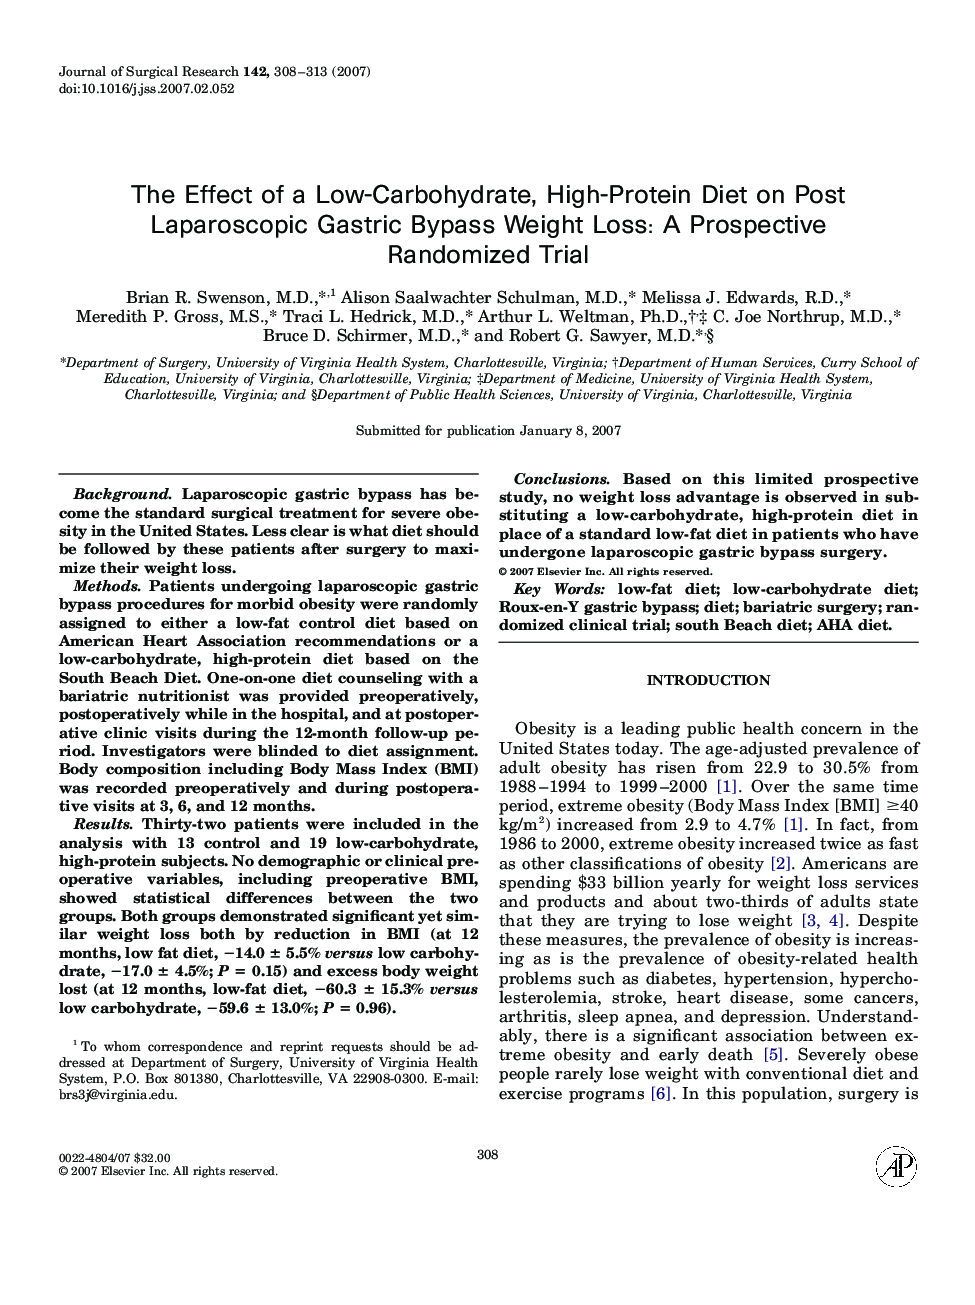 The Effect of a Low-Carbohydrate, High-Protein Diet on Post Laparoscopic Gastric Bypass Weight Loss: A Prospective Randomized Trial